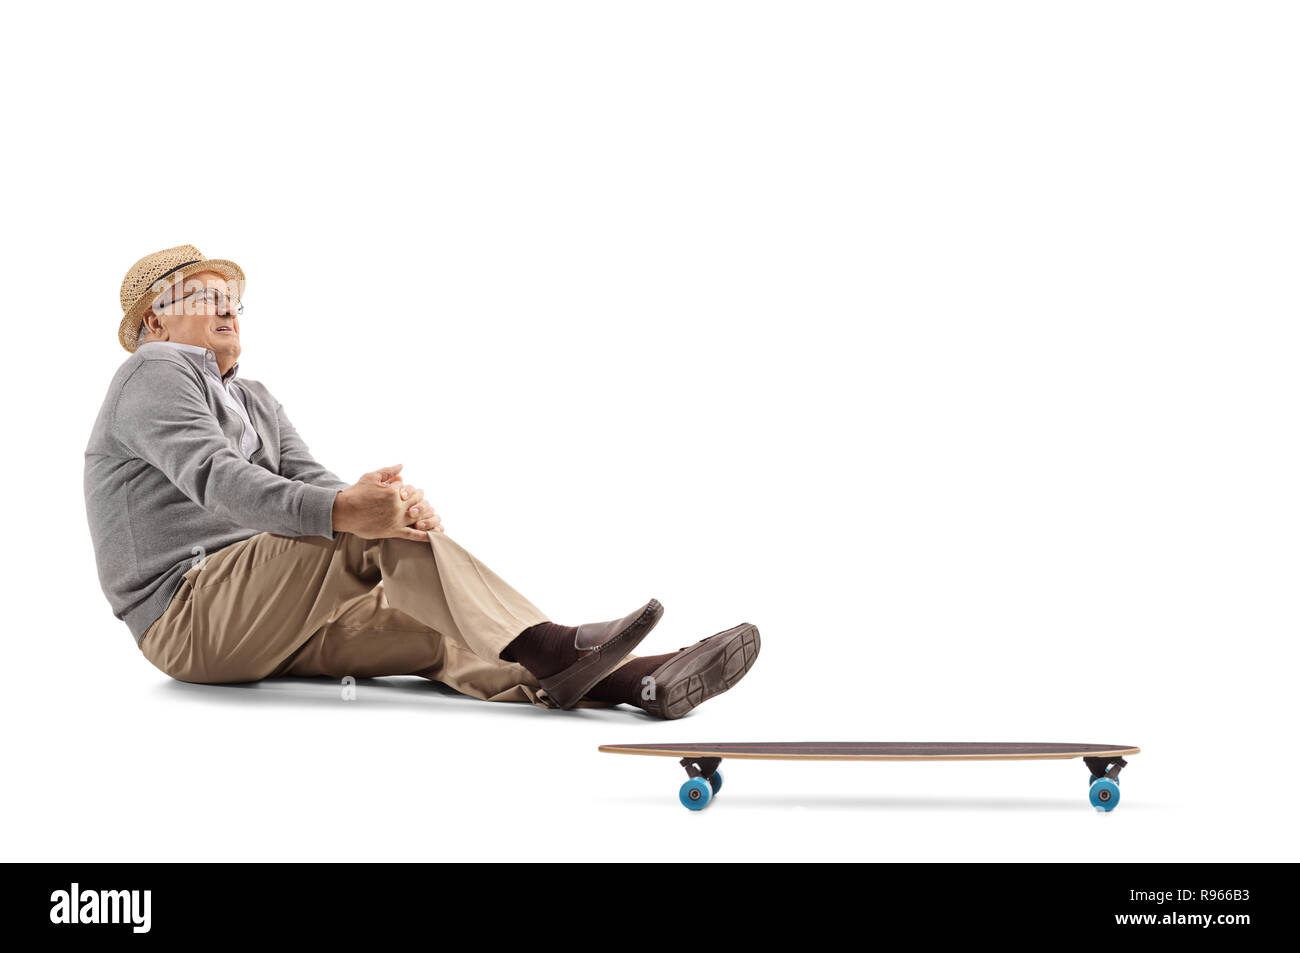 Elderly man in pain sitting on the floor next to a longboard and ...